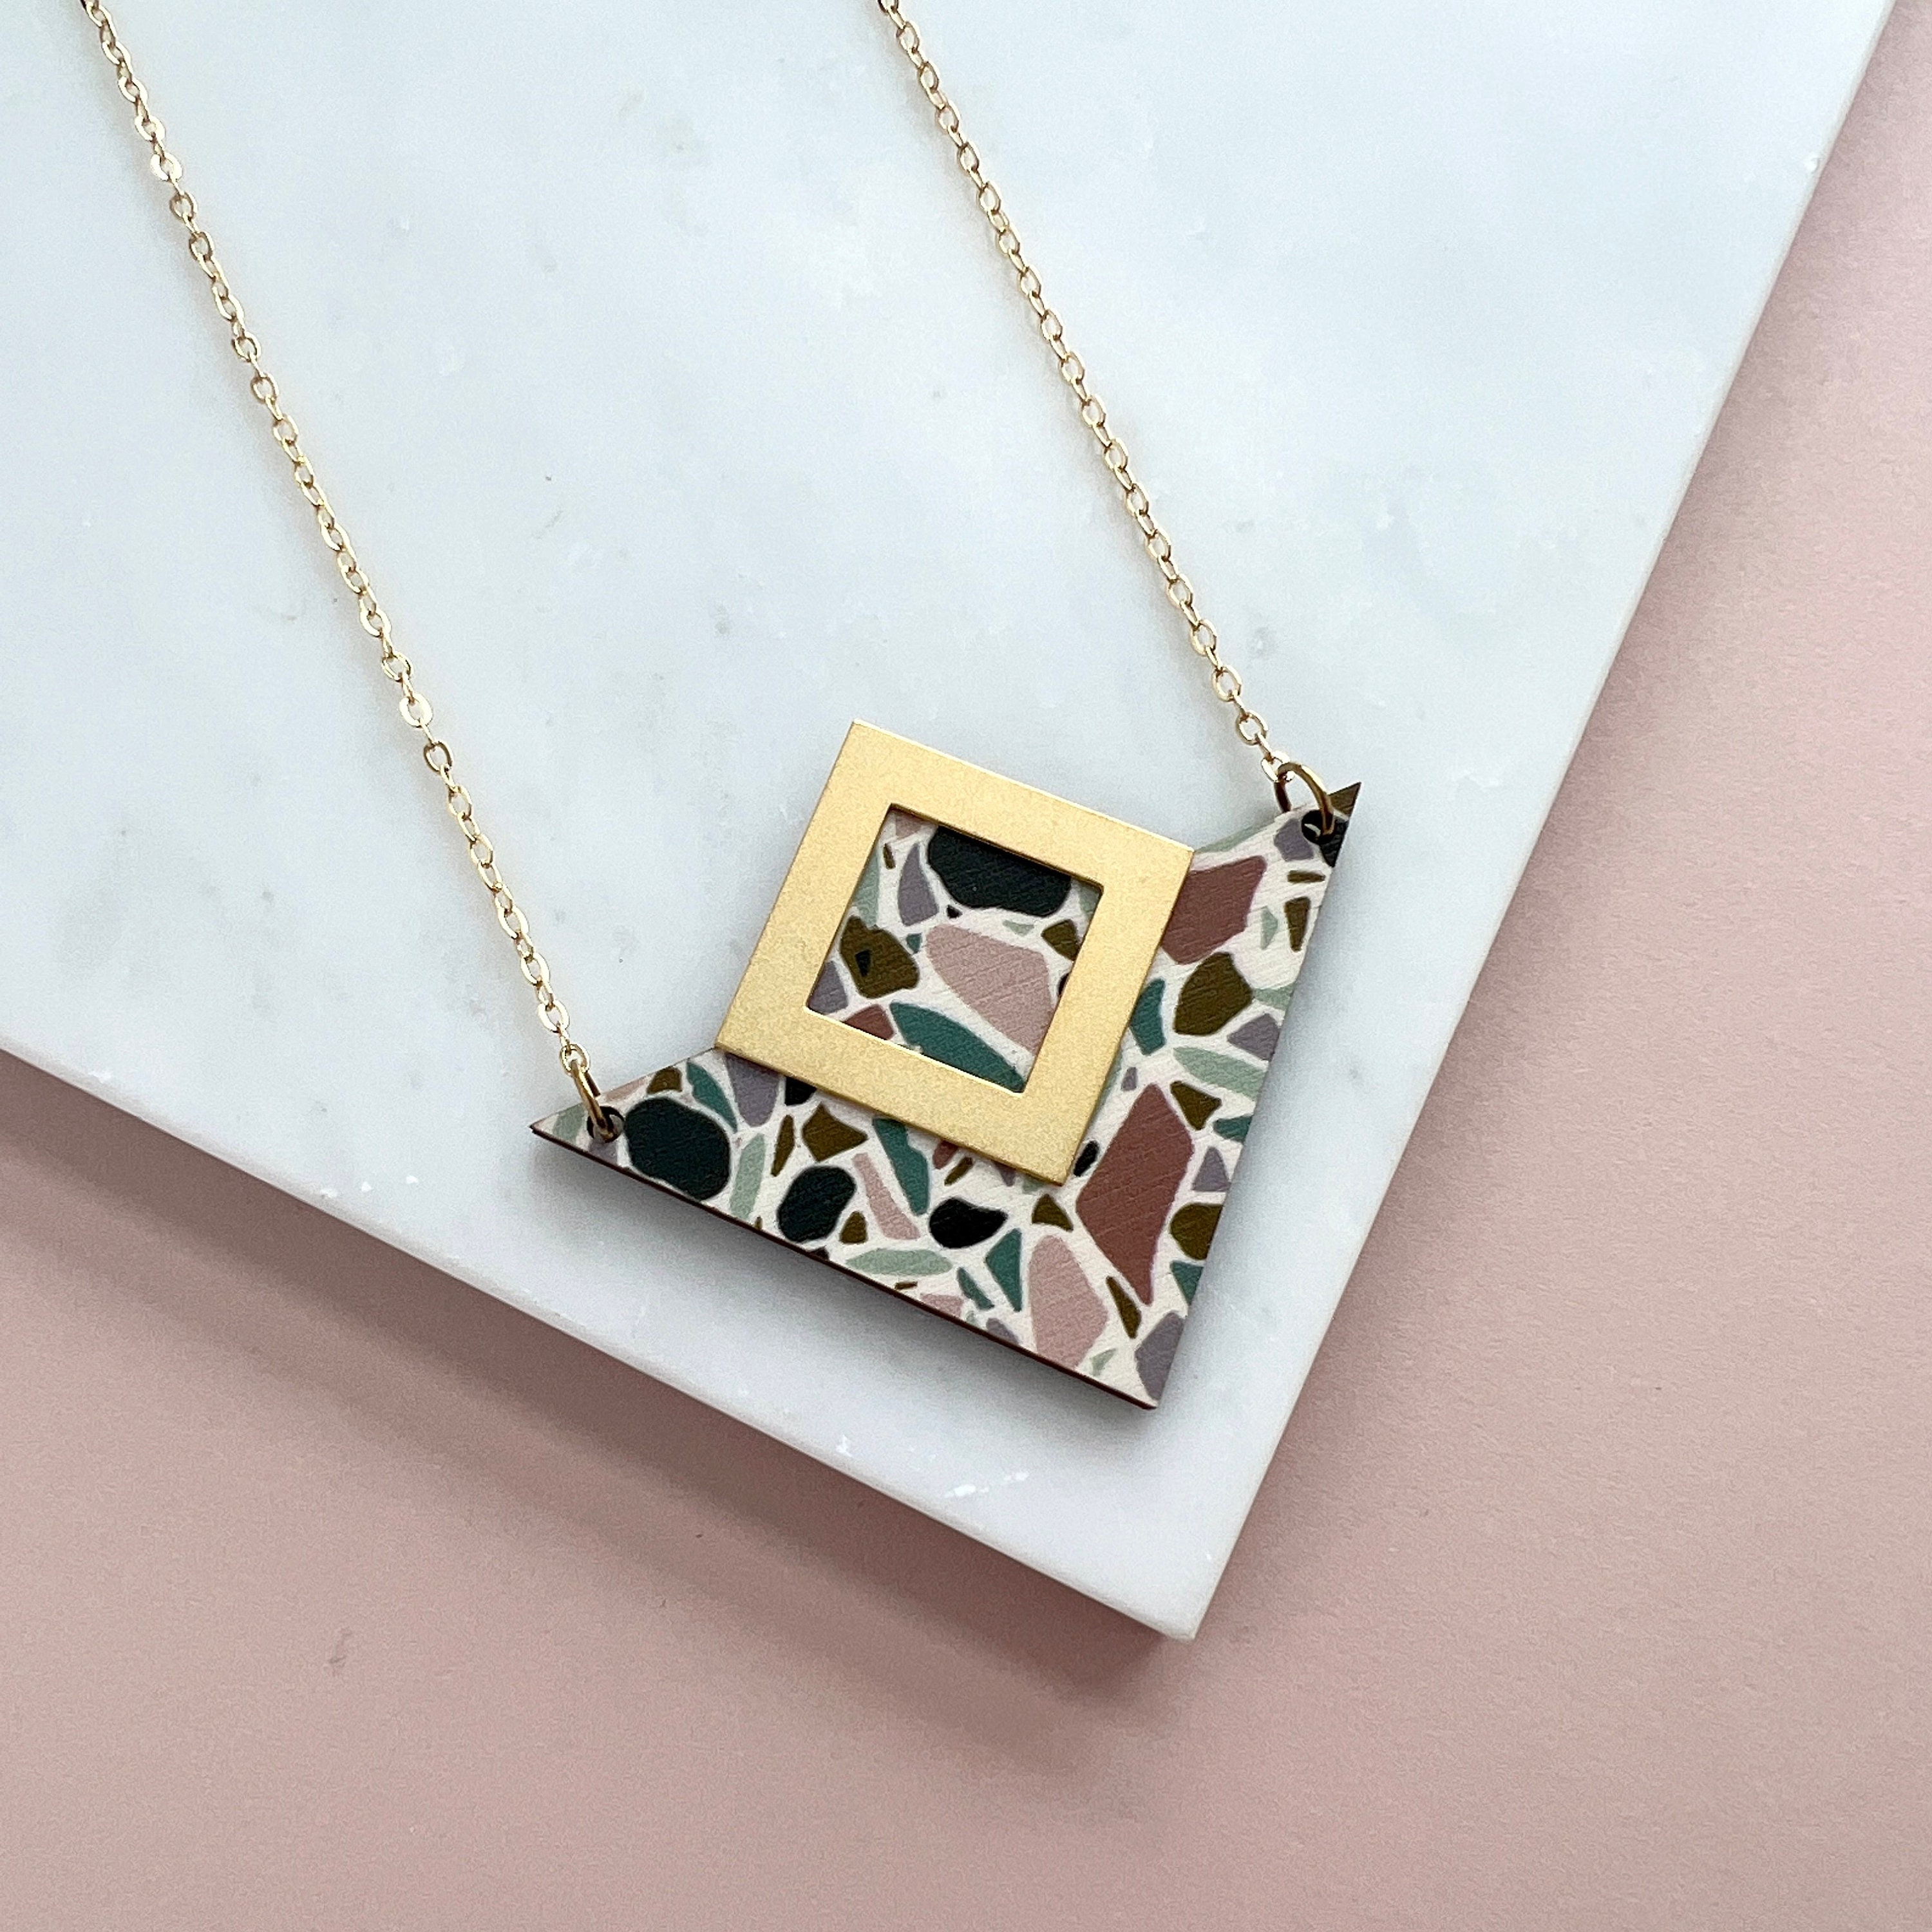 Terrazzo & Gold Triangle Necklace - Geometric Statement Pendant Modern Jewellery Gift For Her